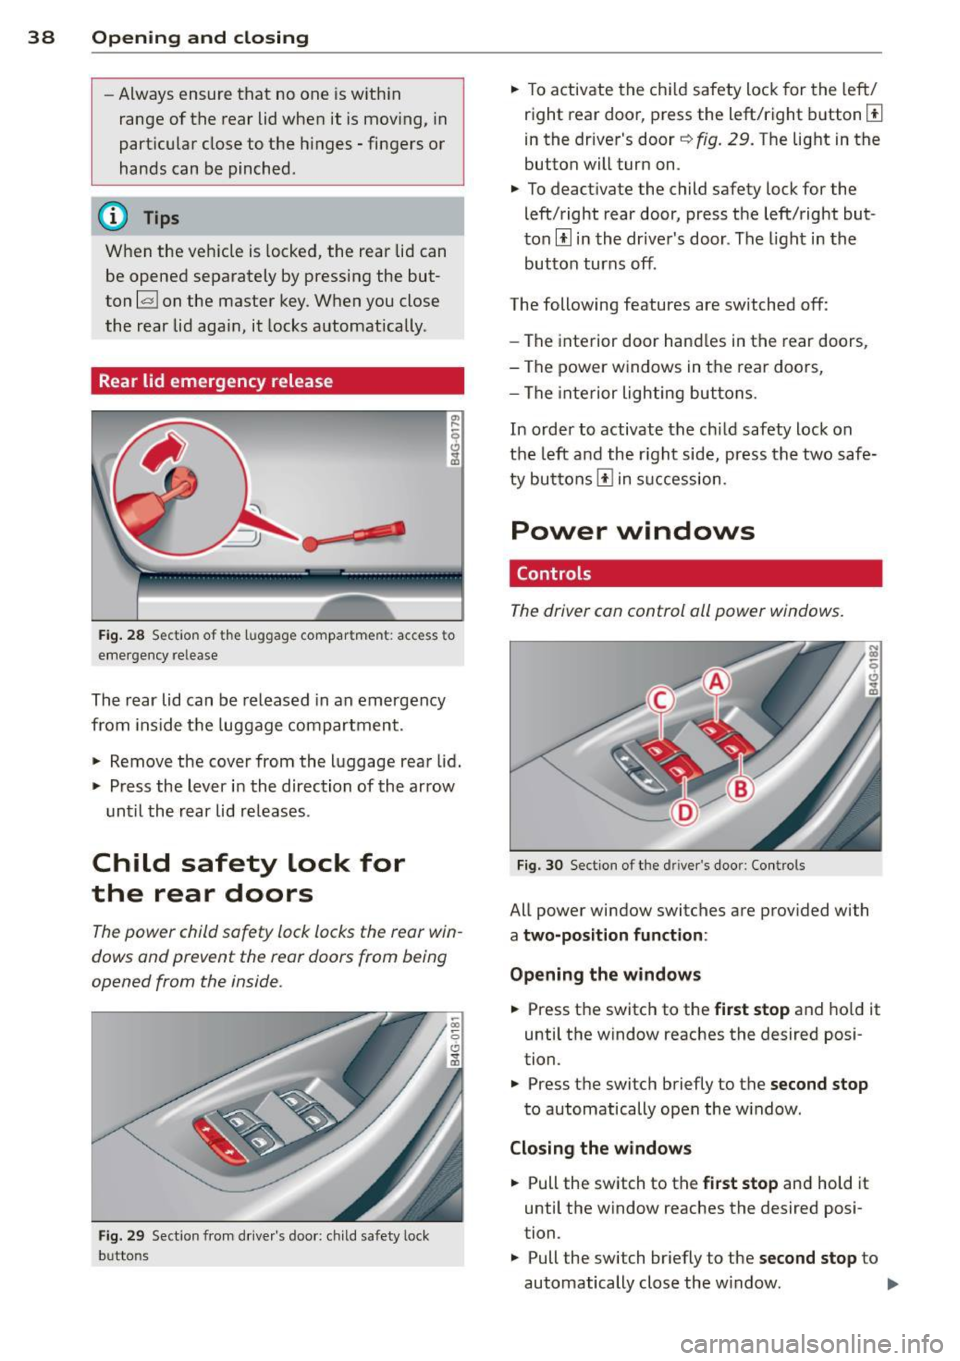 AUDI S6 2013 Owners Guide 38  Opening  and closing 
- Always  ensure  that  no  one  is within 
range  of the  rear  lid when 
it is mov ing,  in 
particular  close  to  the  hinges  - fingers  or 
hands  can  be  pinched. 
(D